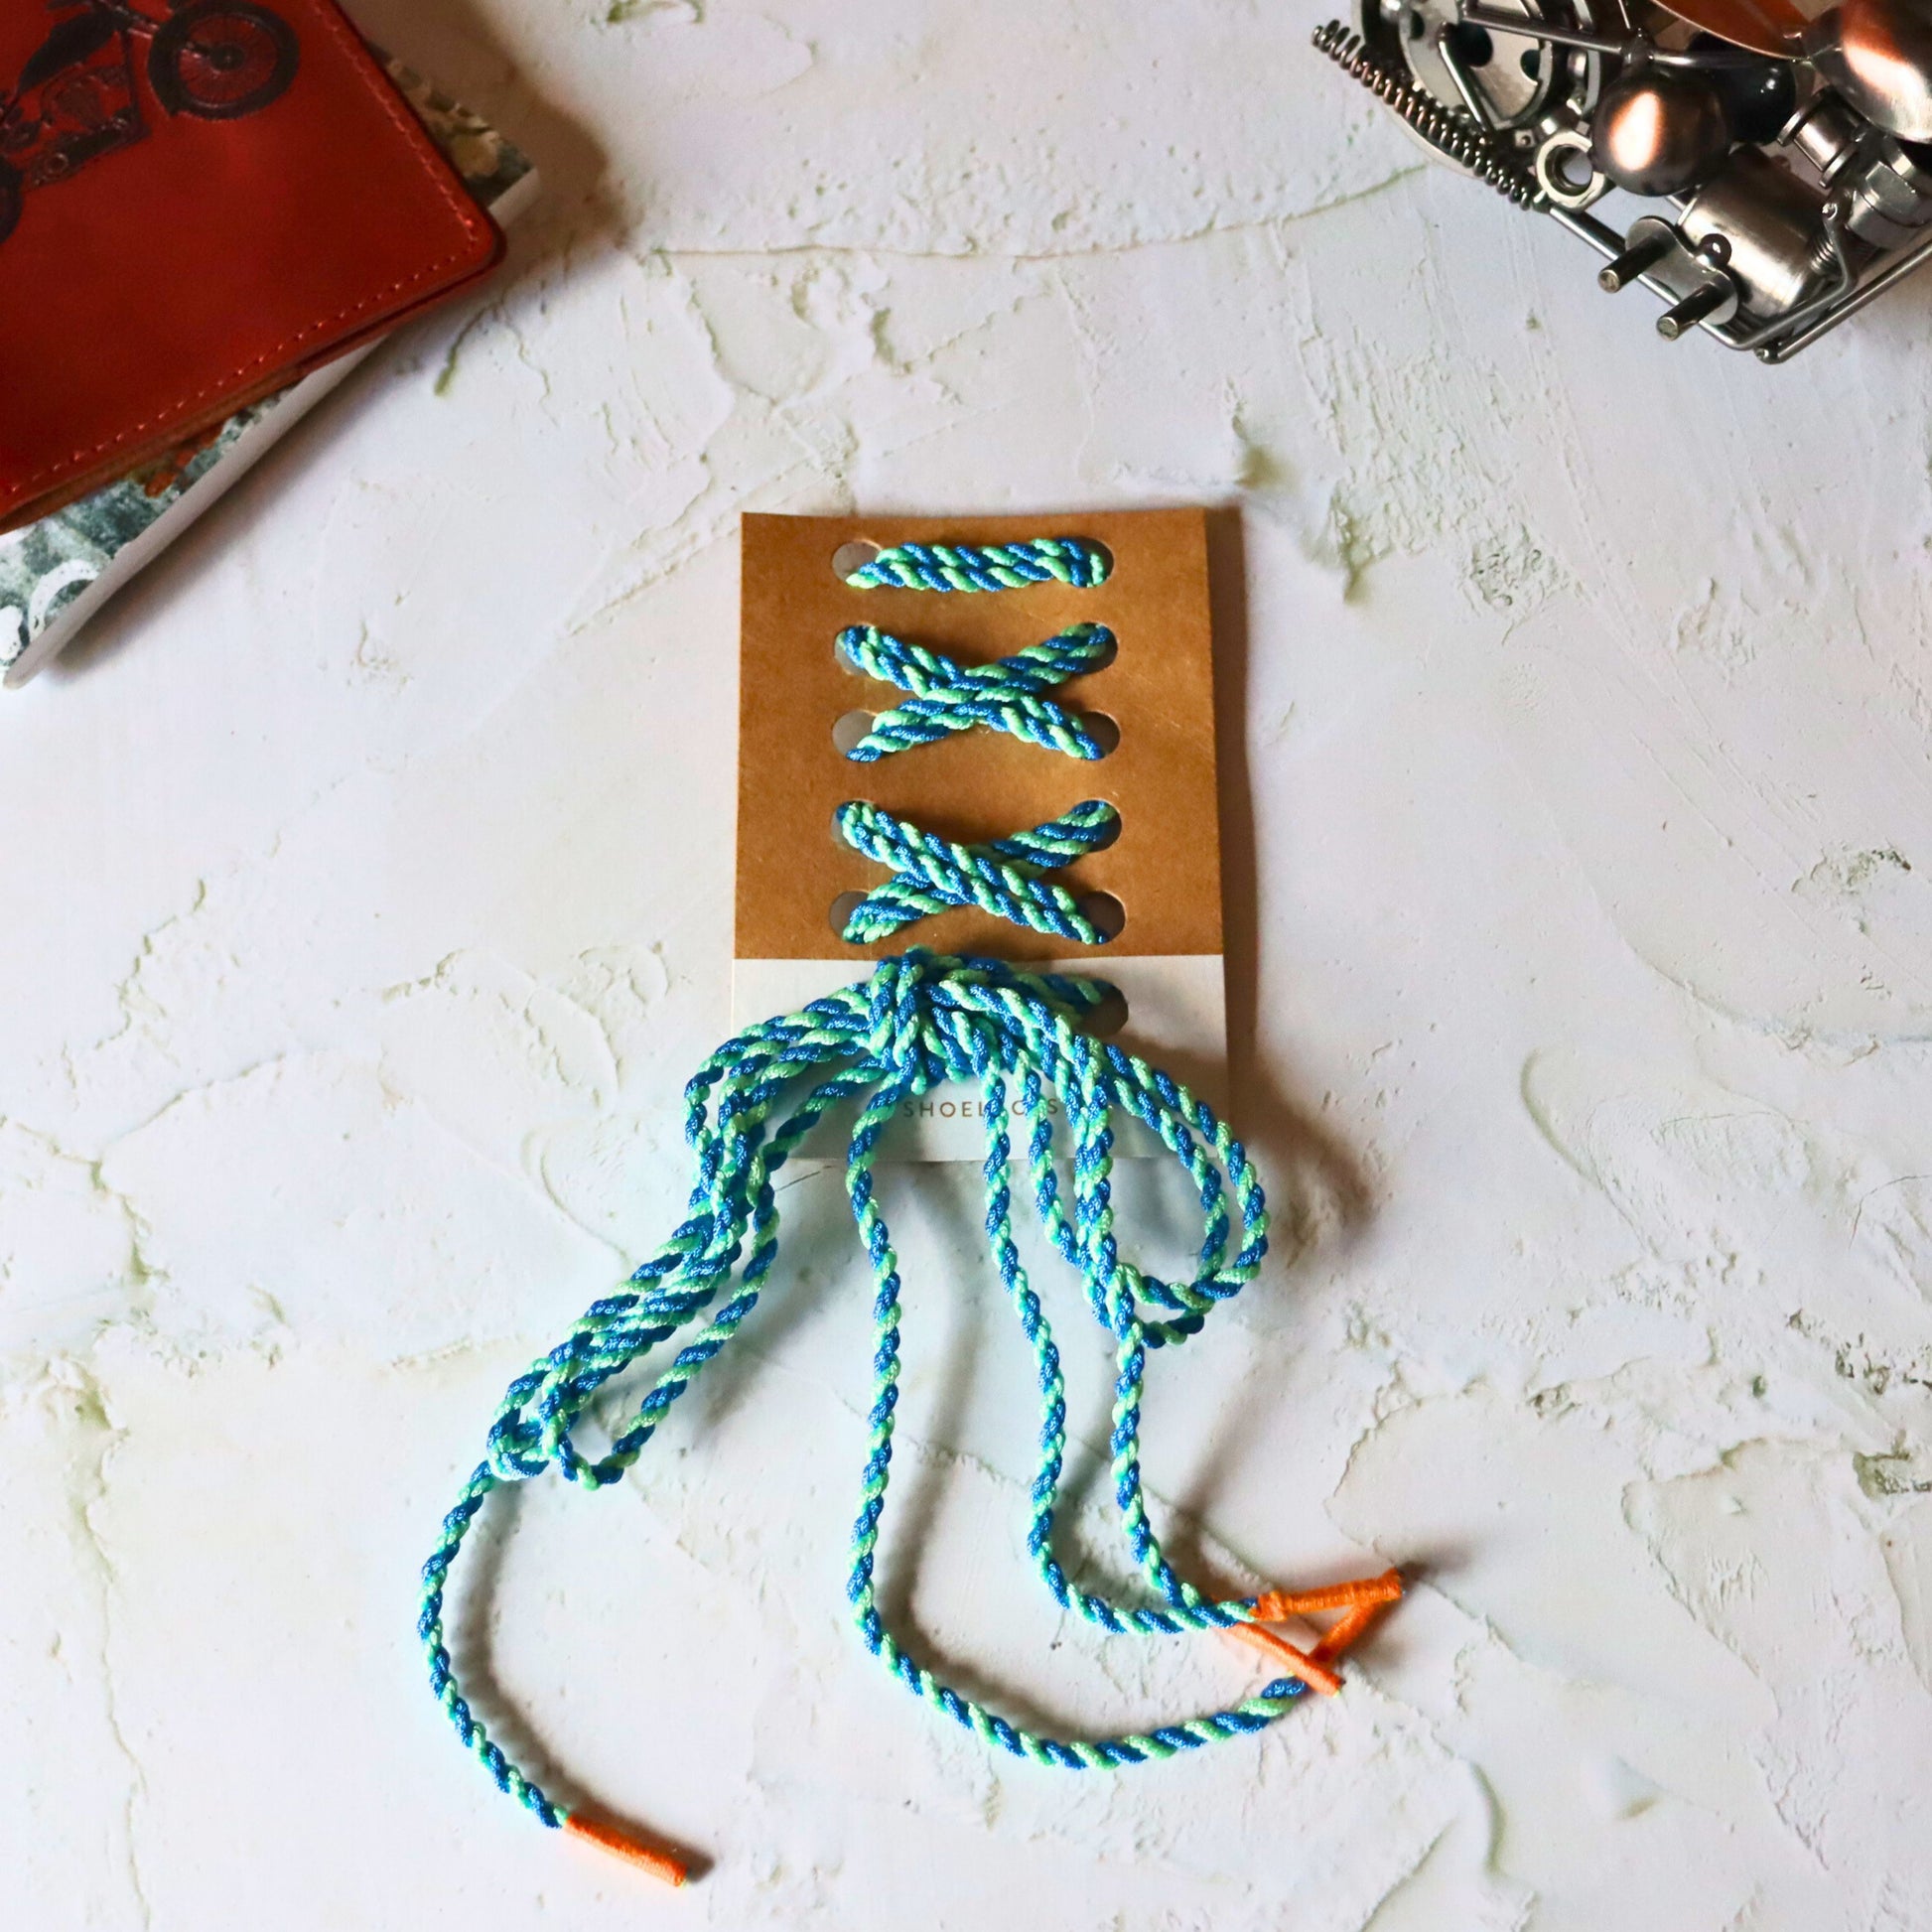 Blue & White Braided Shoelaces with Orange Aglet, Coloured Shoestrings - Aksa Home Decor 